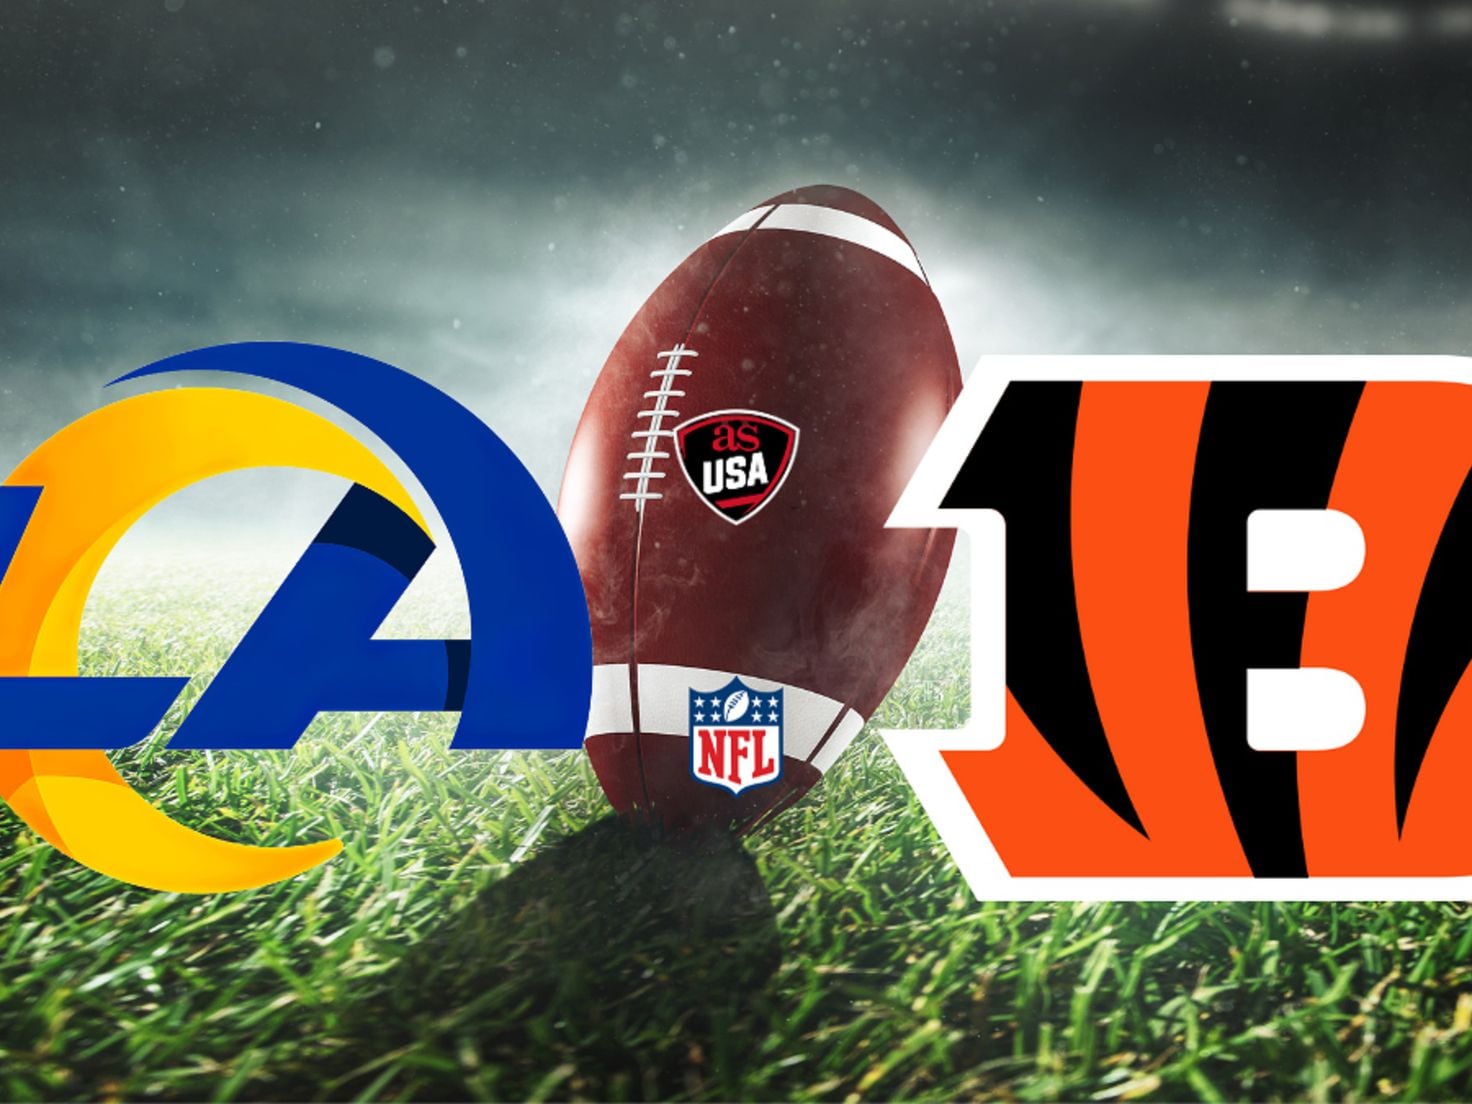 bengals and rams live